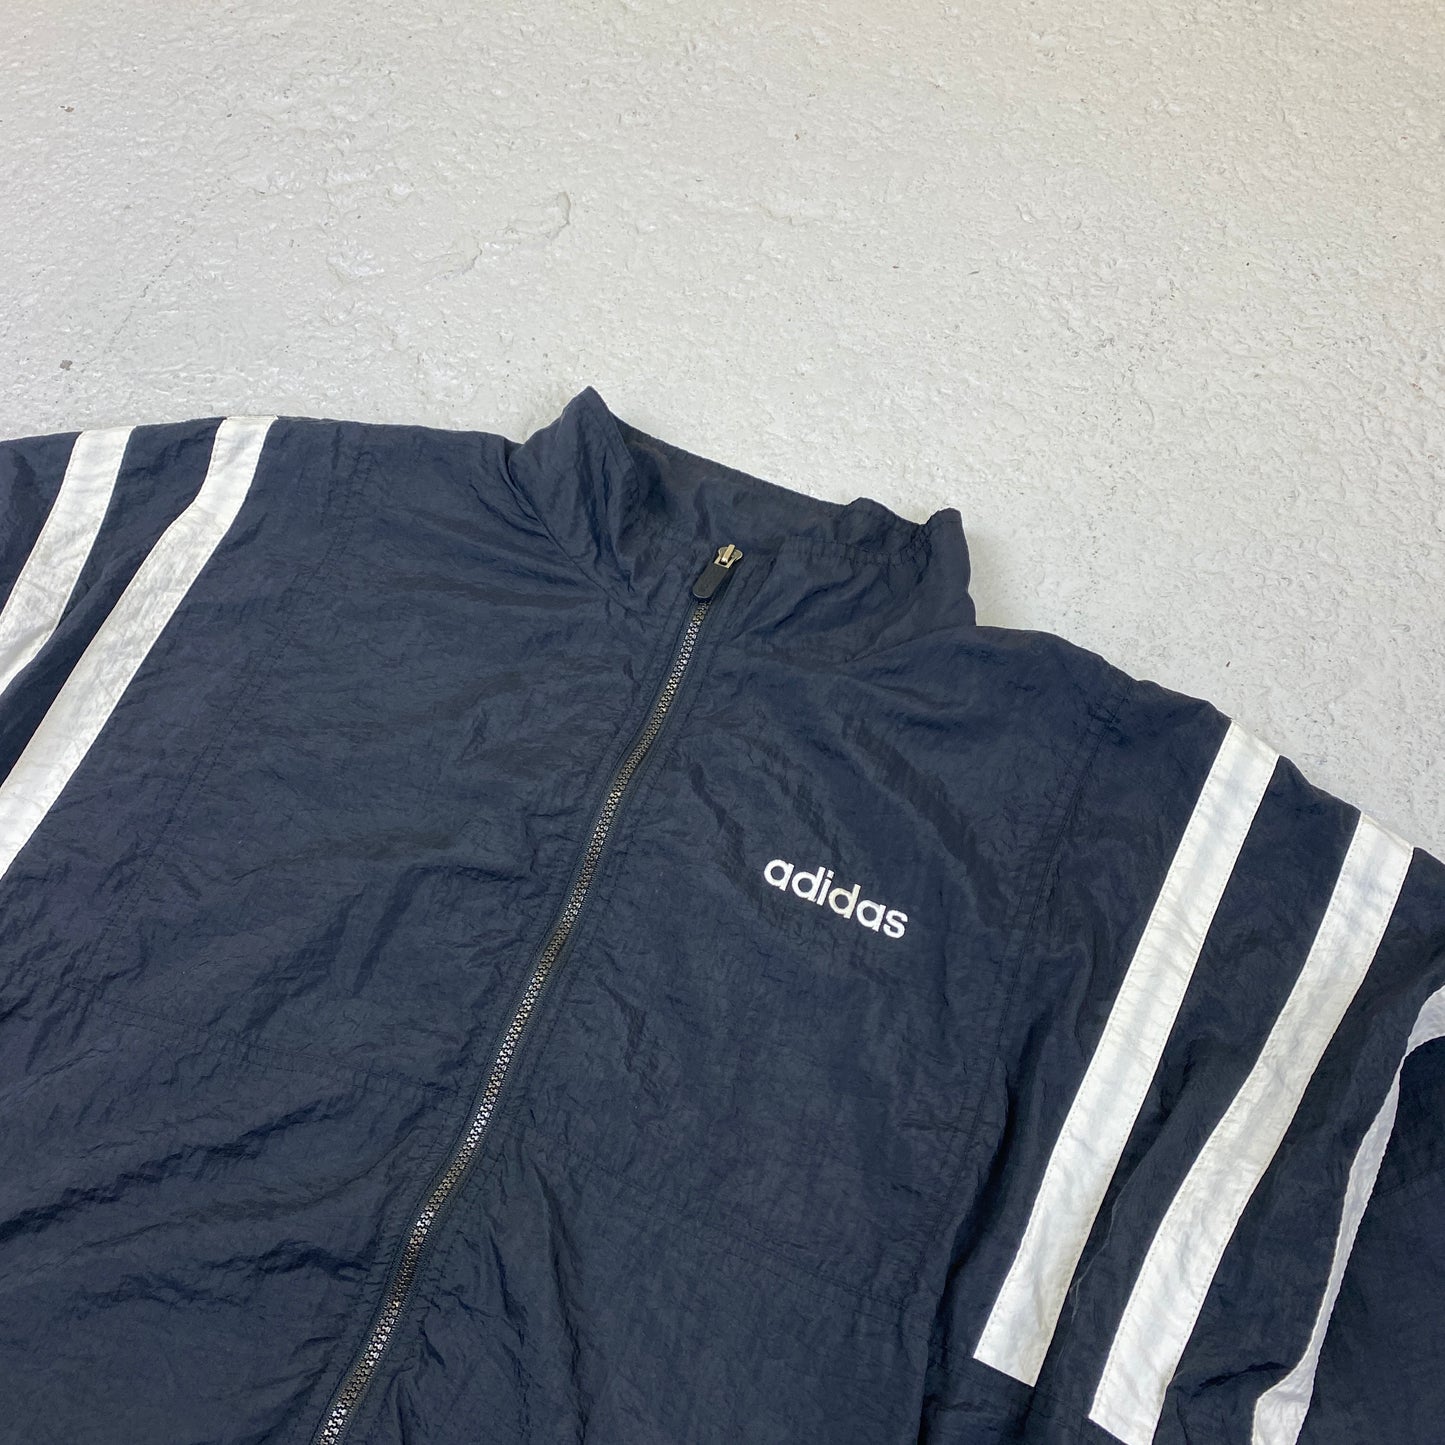 Adidas RARE Embroidered Track Jacket (L-XL)